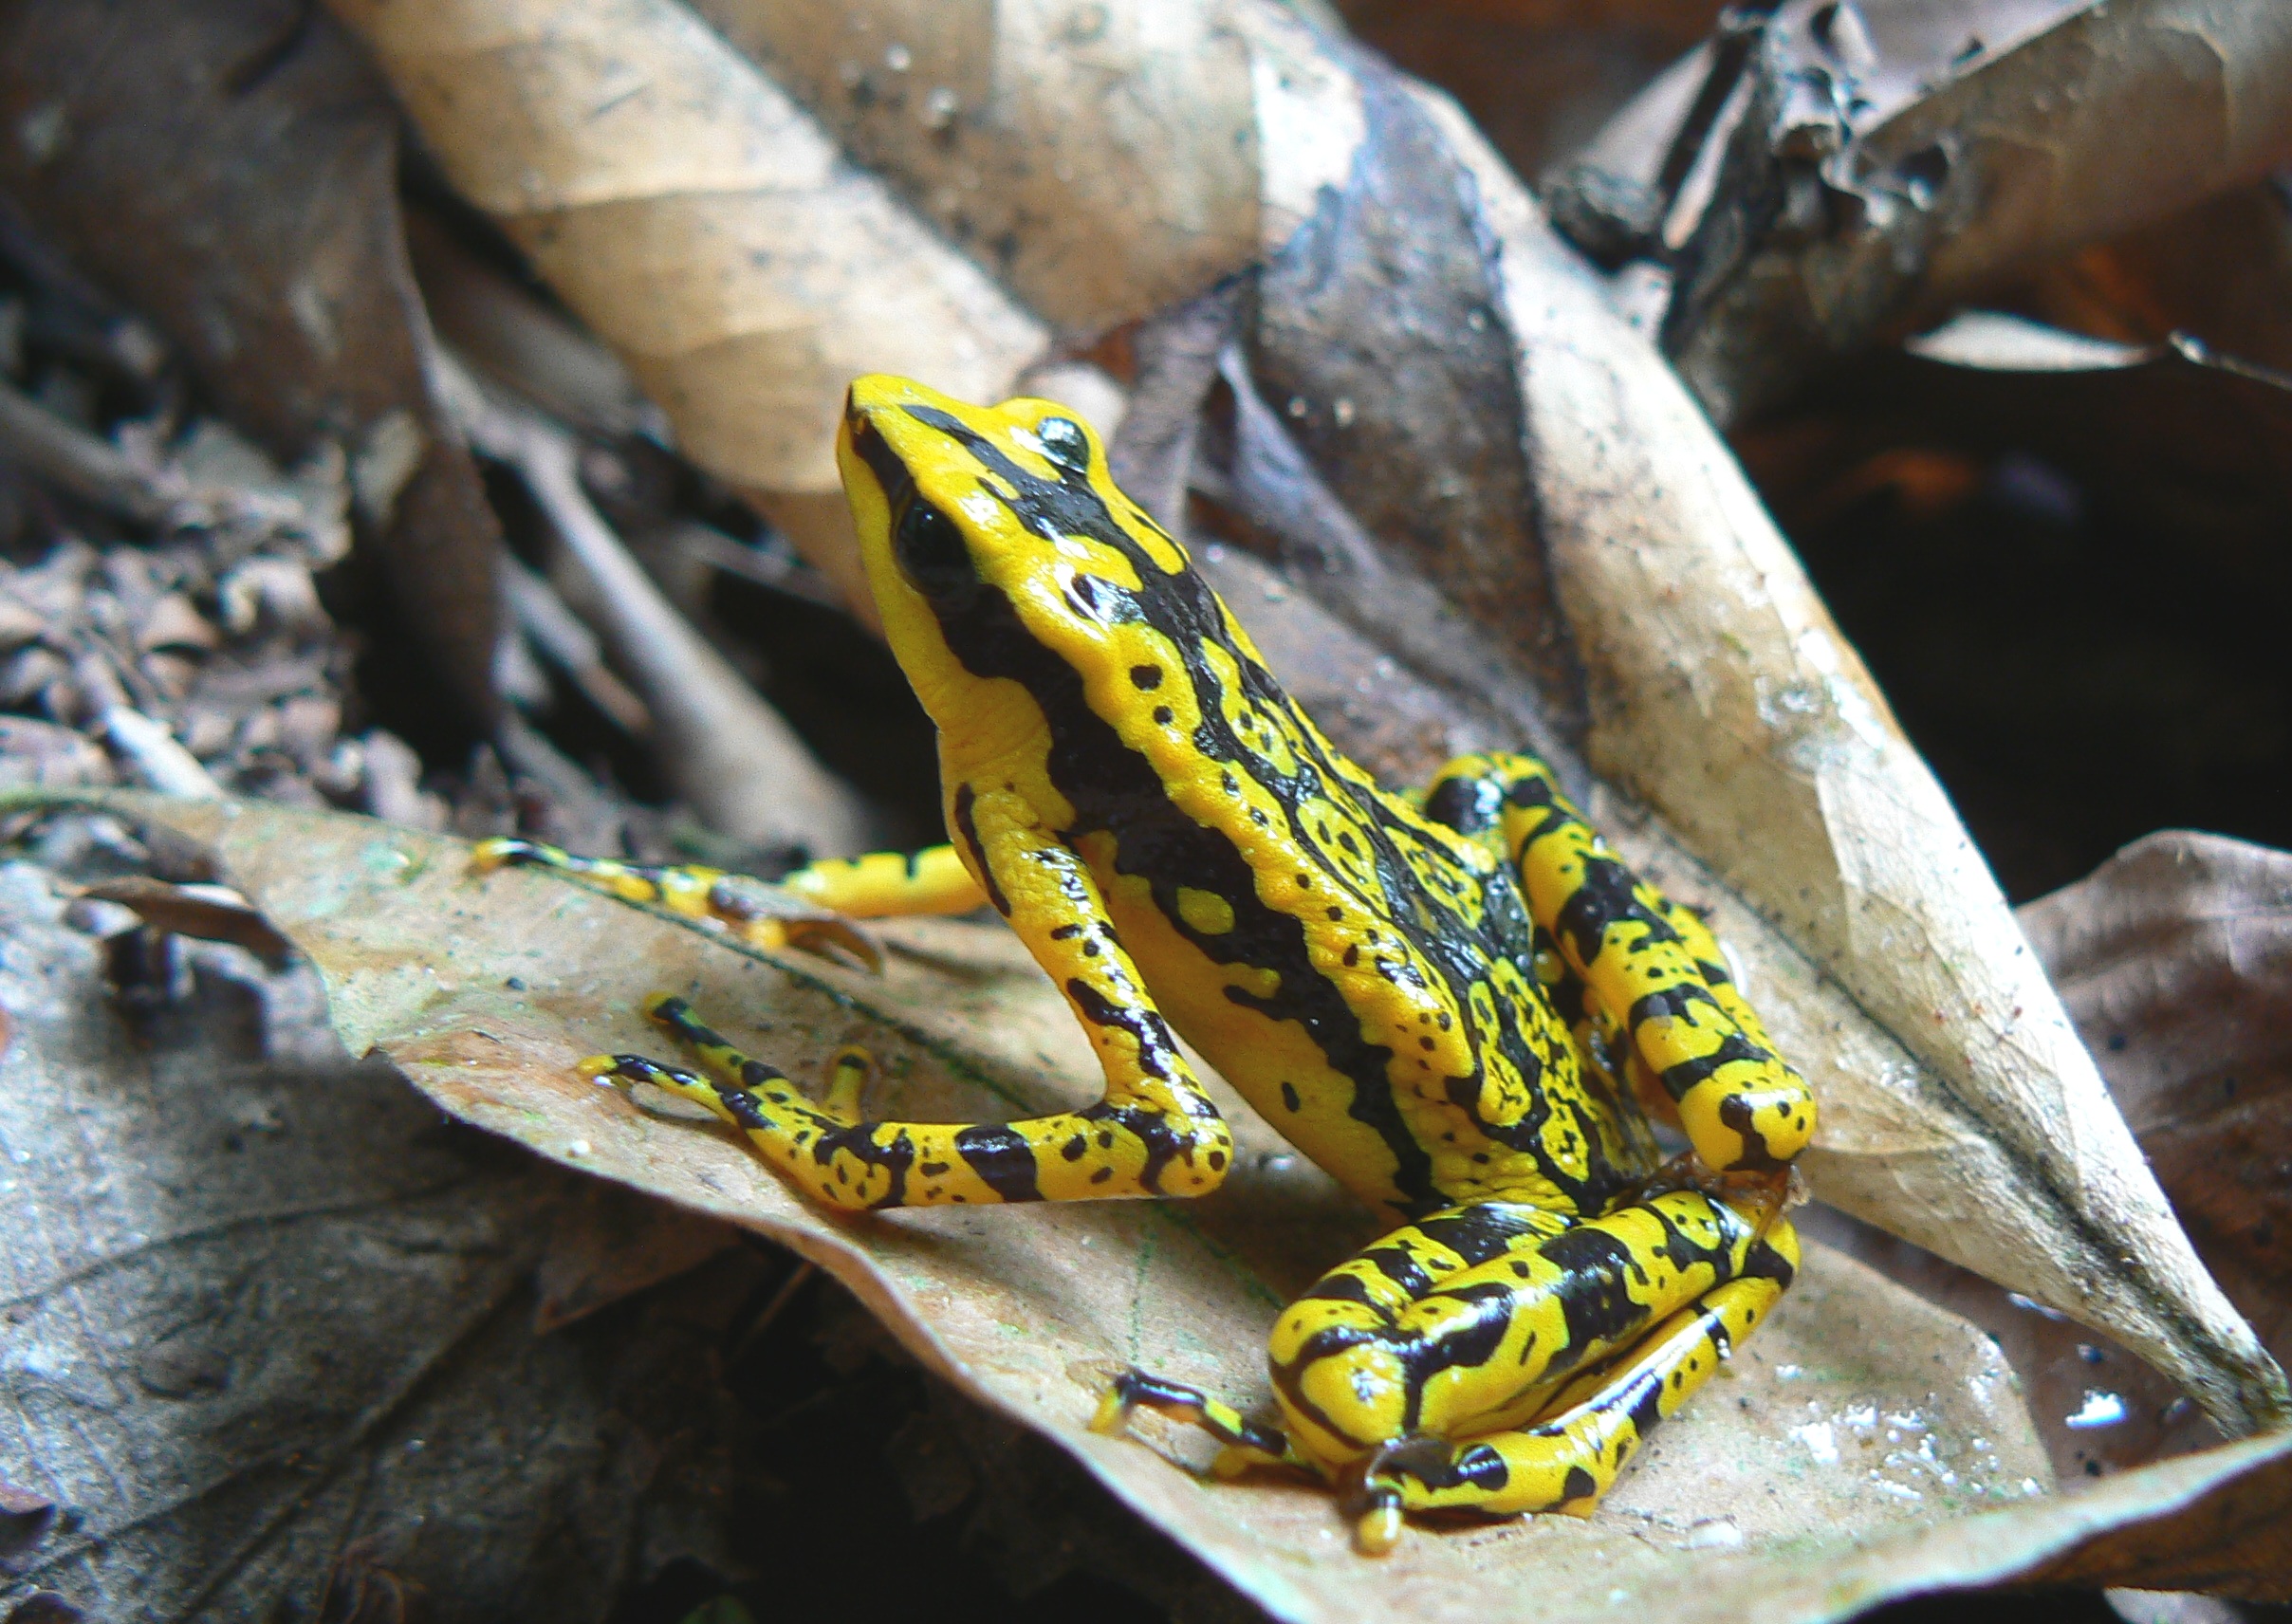 The Rancho Grande Harlequin Toad is highly vulnerable to chytridiomycosis, but thanks to high reproductive rates, the species persists. (Photo by Manuel Guerreiro)